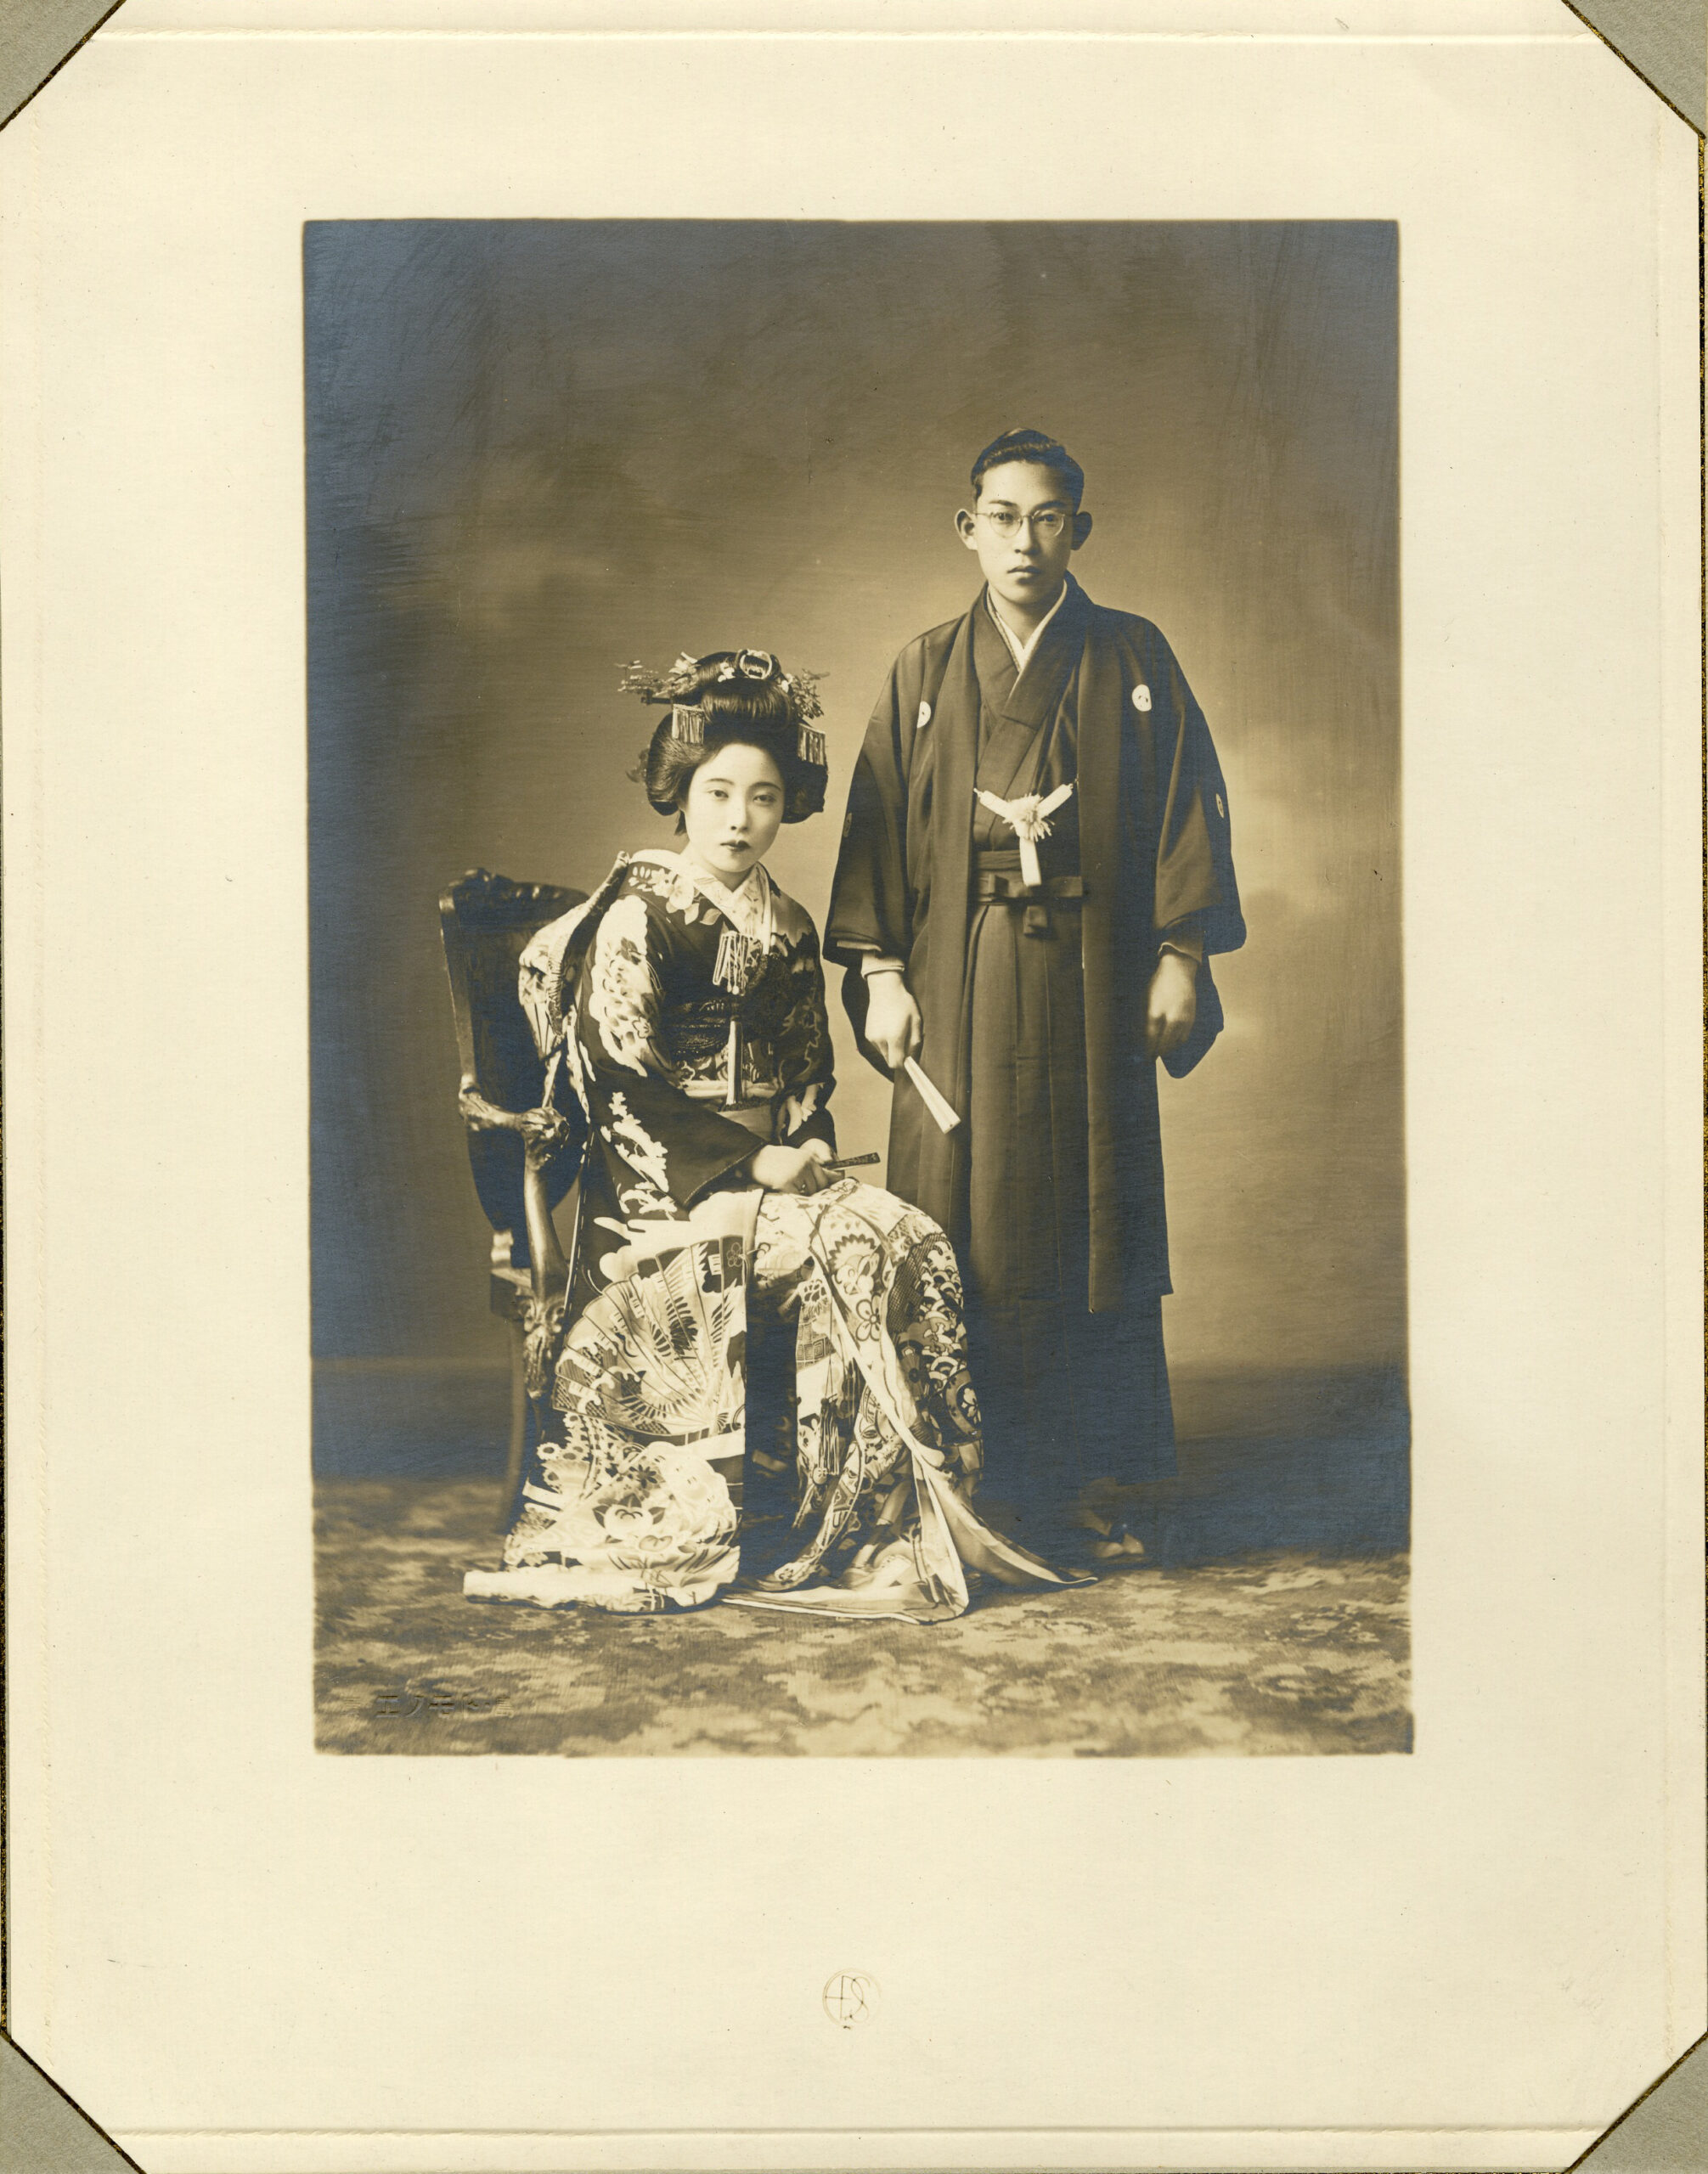 Wedding portrait of James Numata and his first wife, ca. 1938.